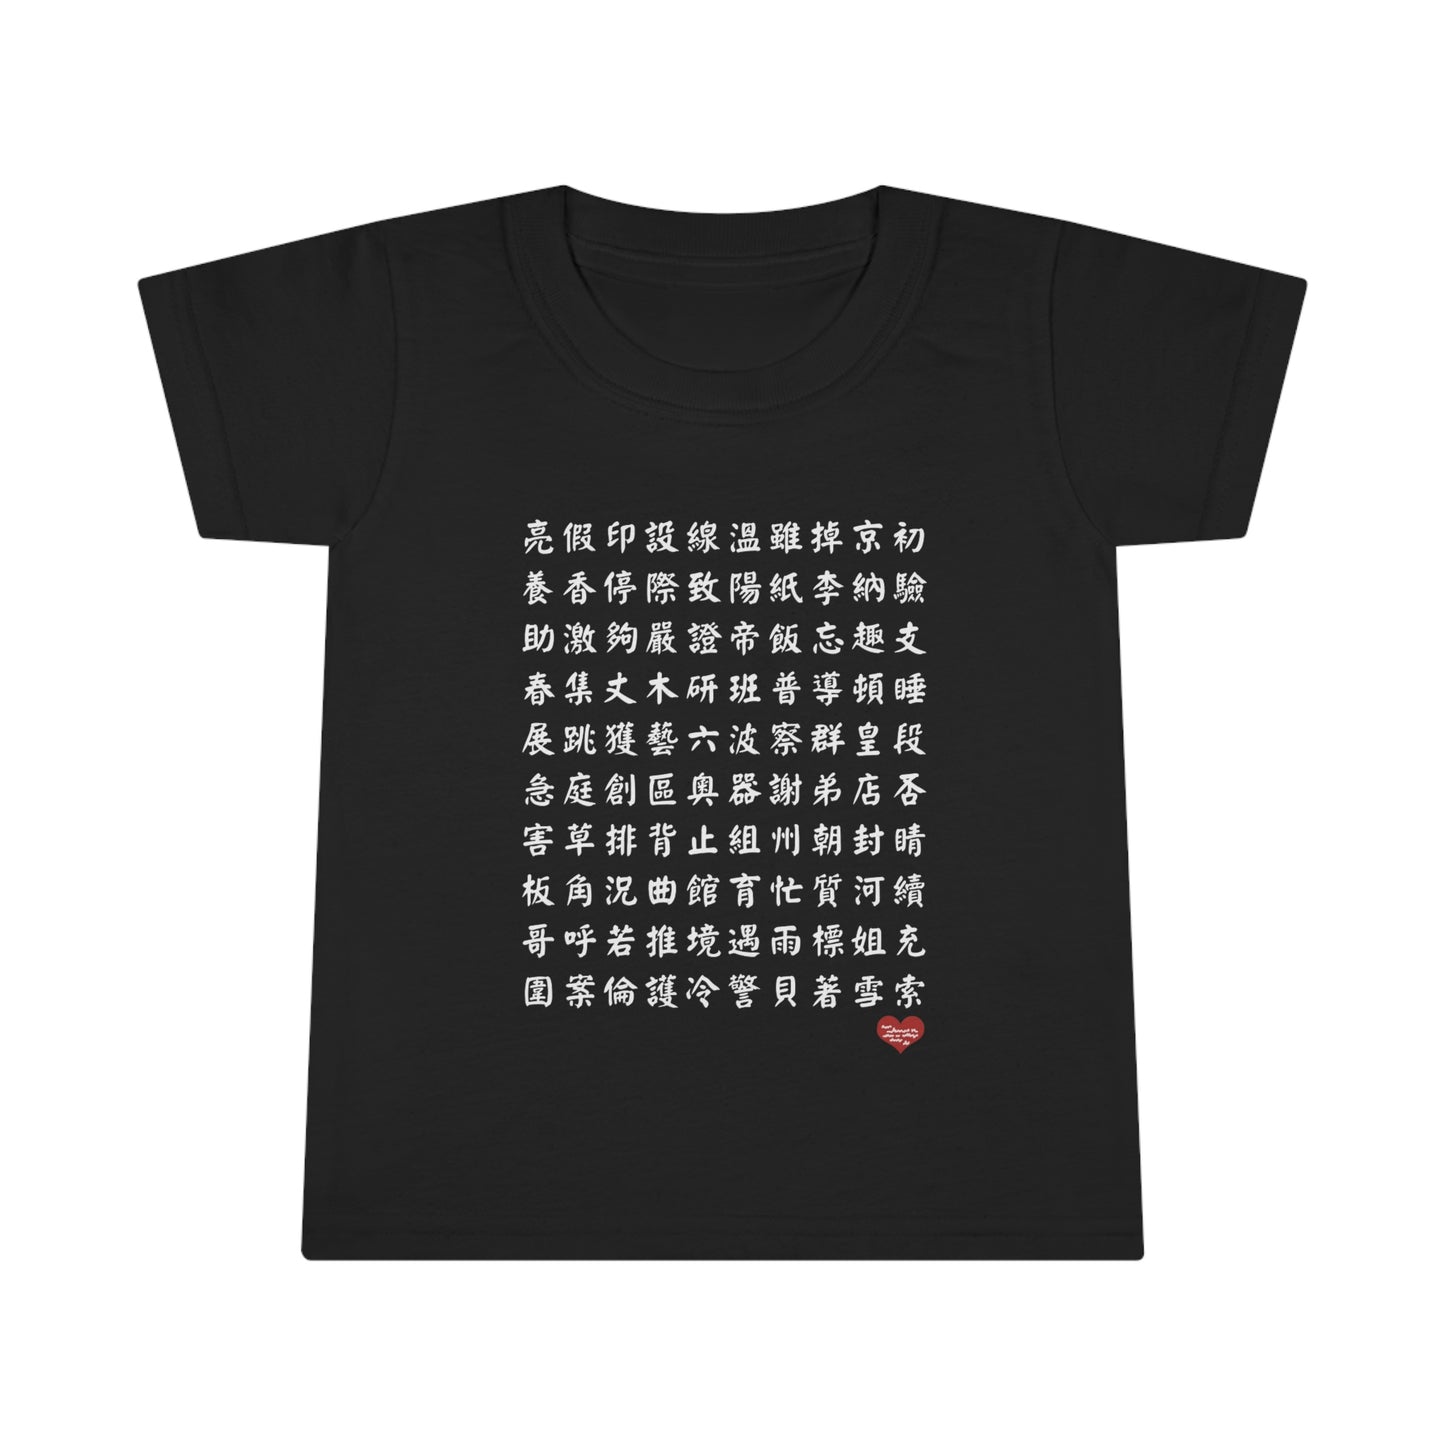 Toddler 1000 Characters Set 7,  1000漢字系列 #7 Color Block T-shirts